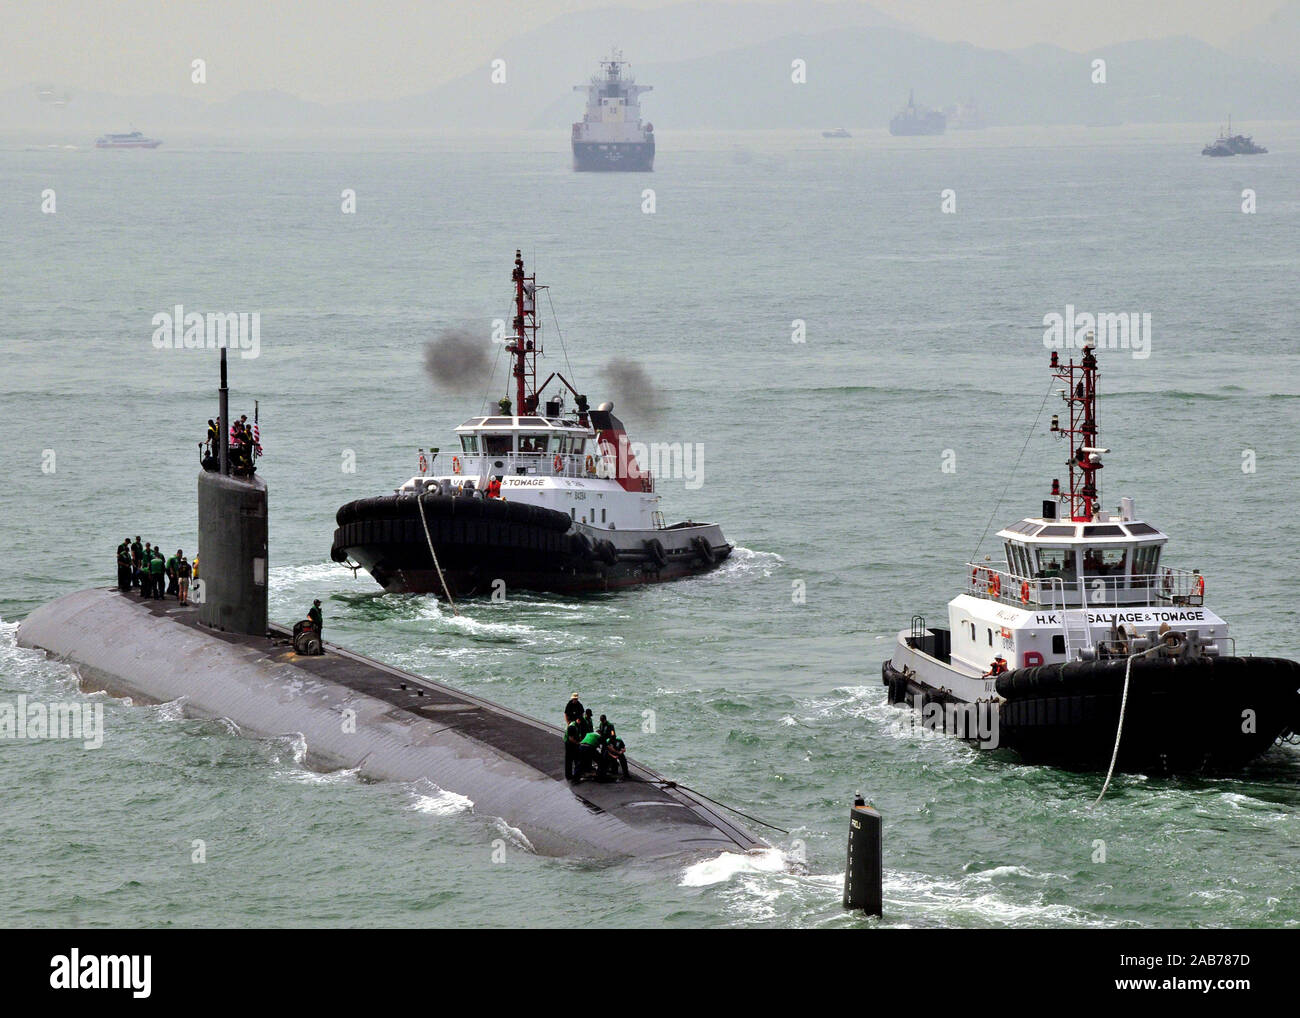 (May 20, 2011) The Los Angeles-class attack submarine USS Hampton (SSN 767) gets underway from Victoria Harbor after receiving support from the submarine tender USS Frank Cable (AS 40). Frank Cable conducts maintenance and support of submarines and surface vessels deployed in the U.S. 7th Fleet area of responsibility. Stock Photo